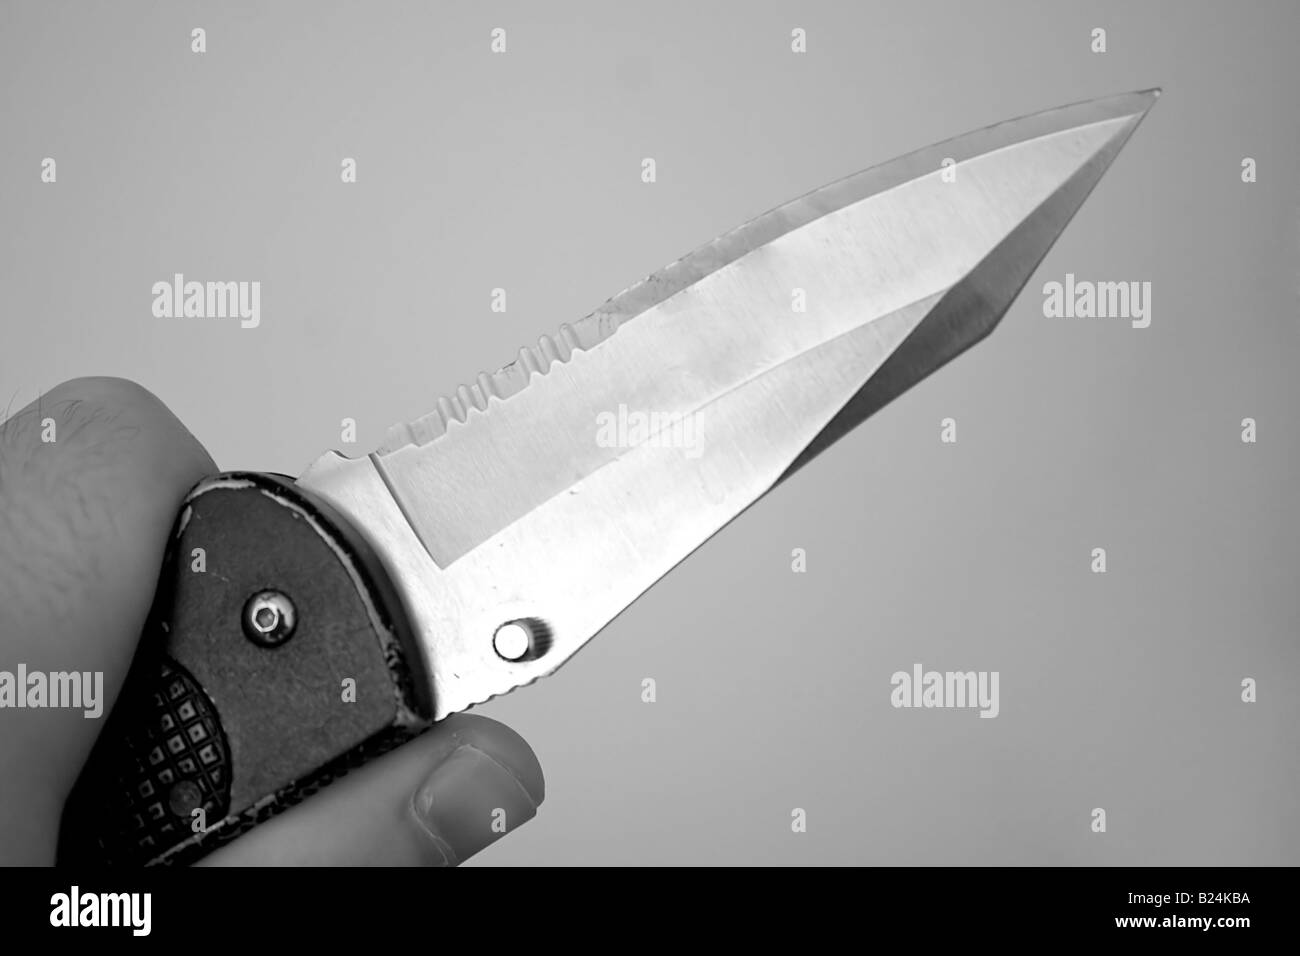 Closeup of a hand holding a knife with a sharp blade Stock Photo